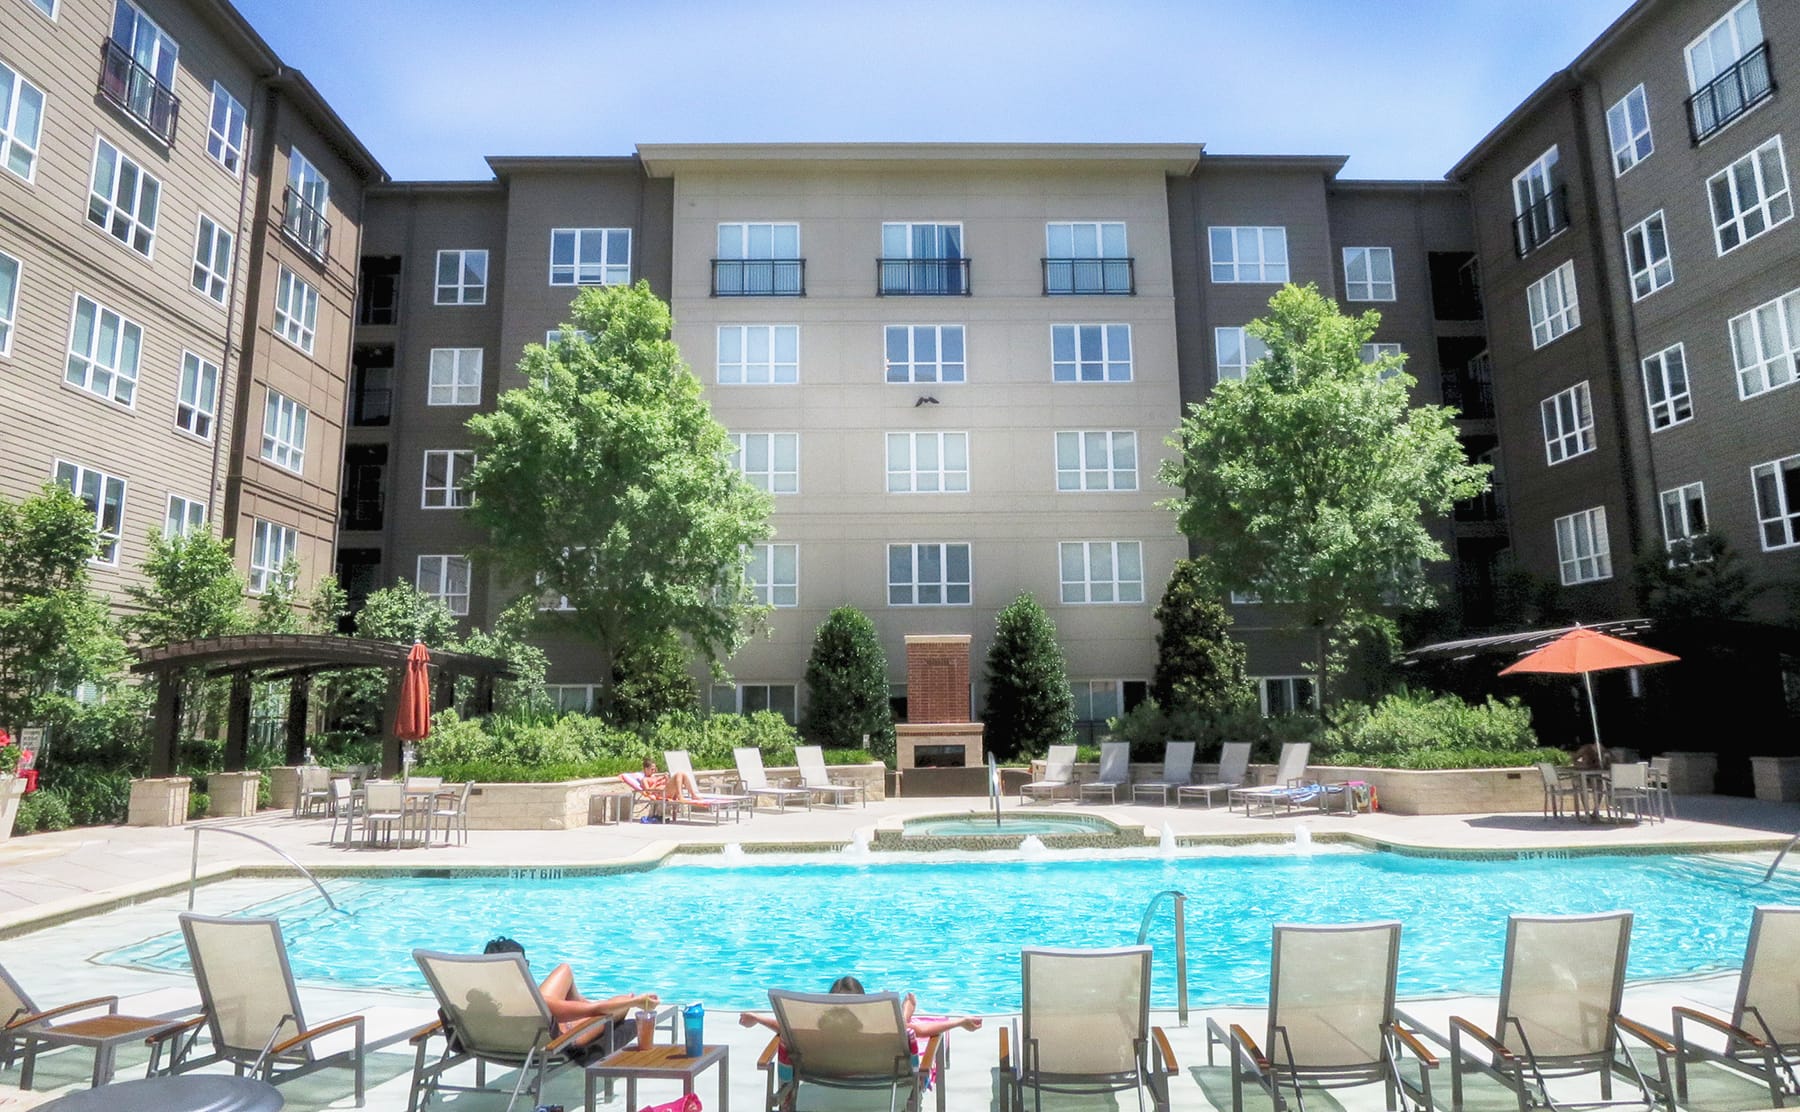 Apartments in Uptown Dallas with the Best Pools